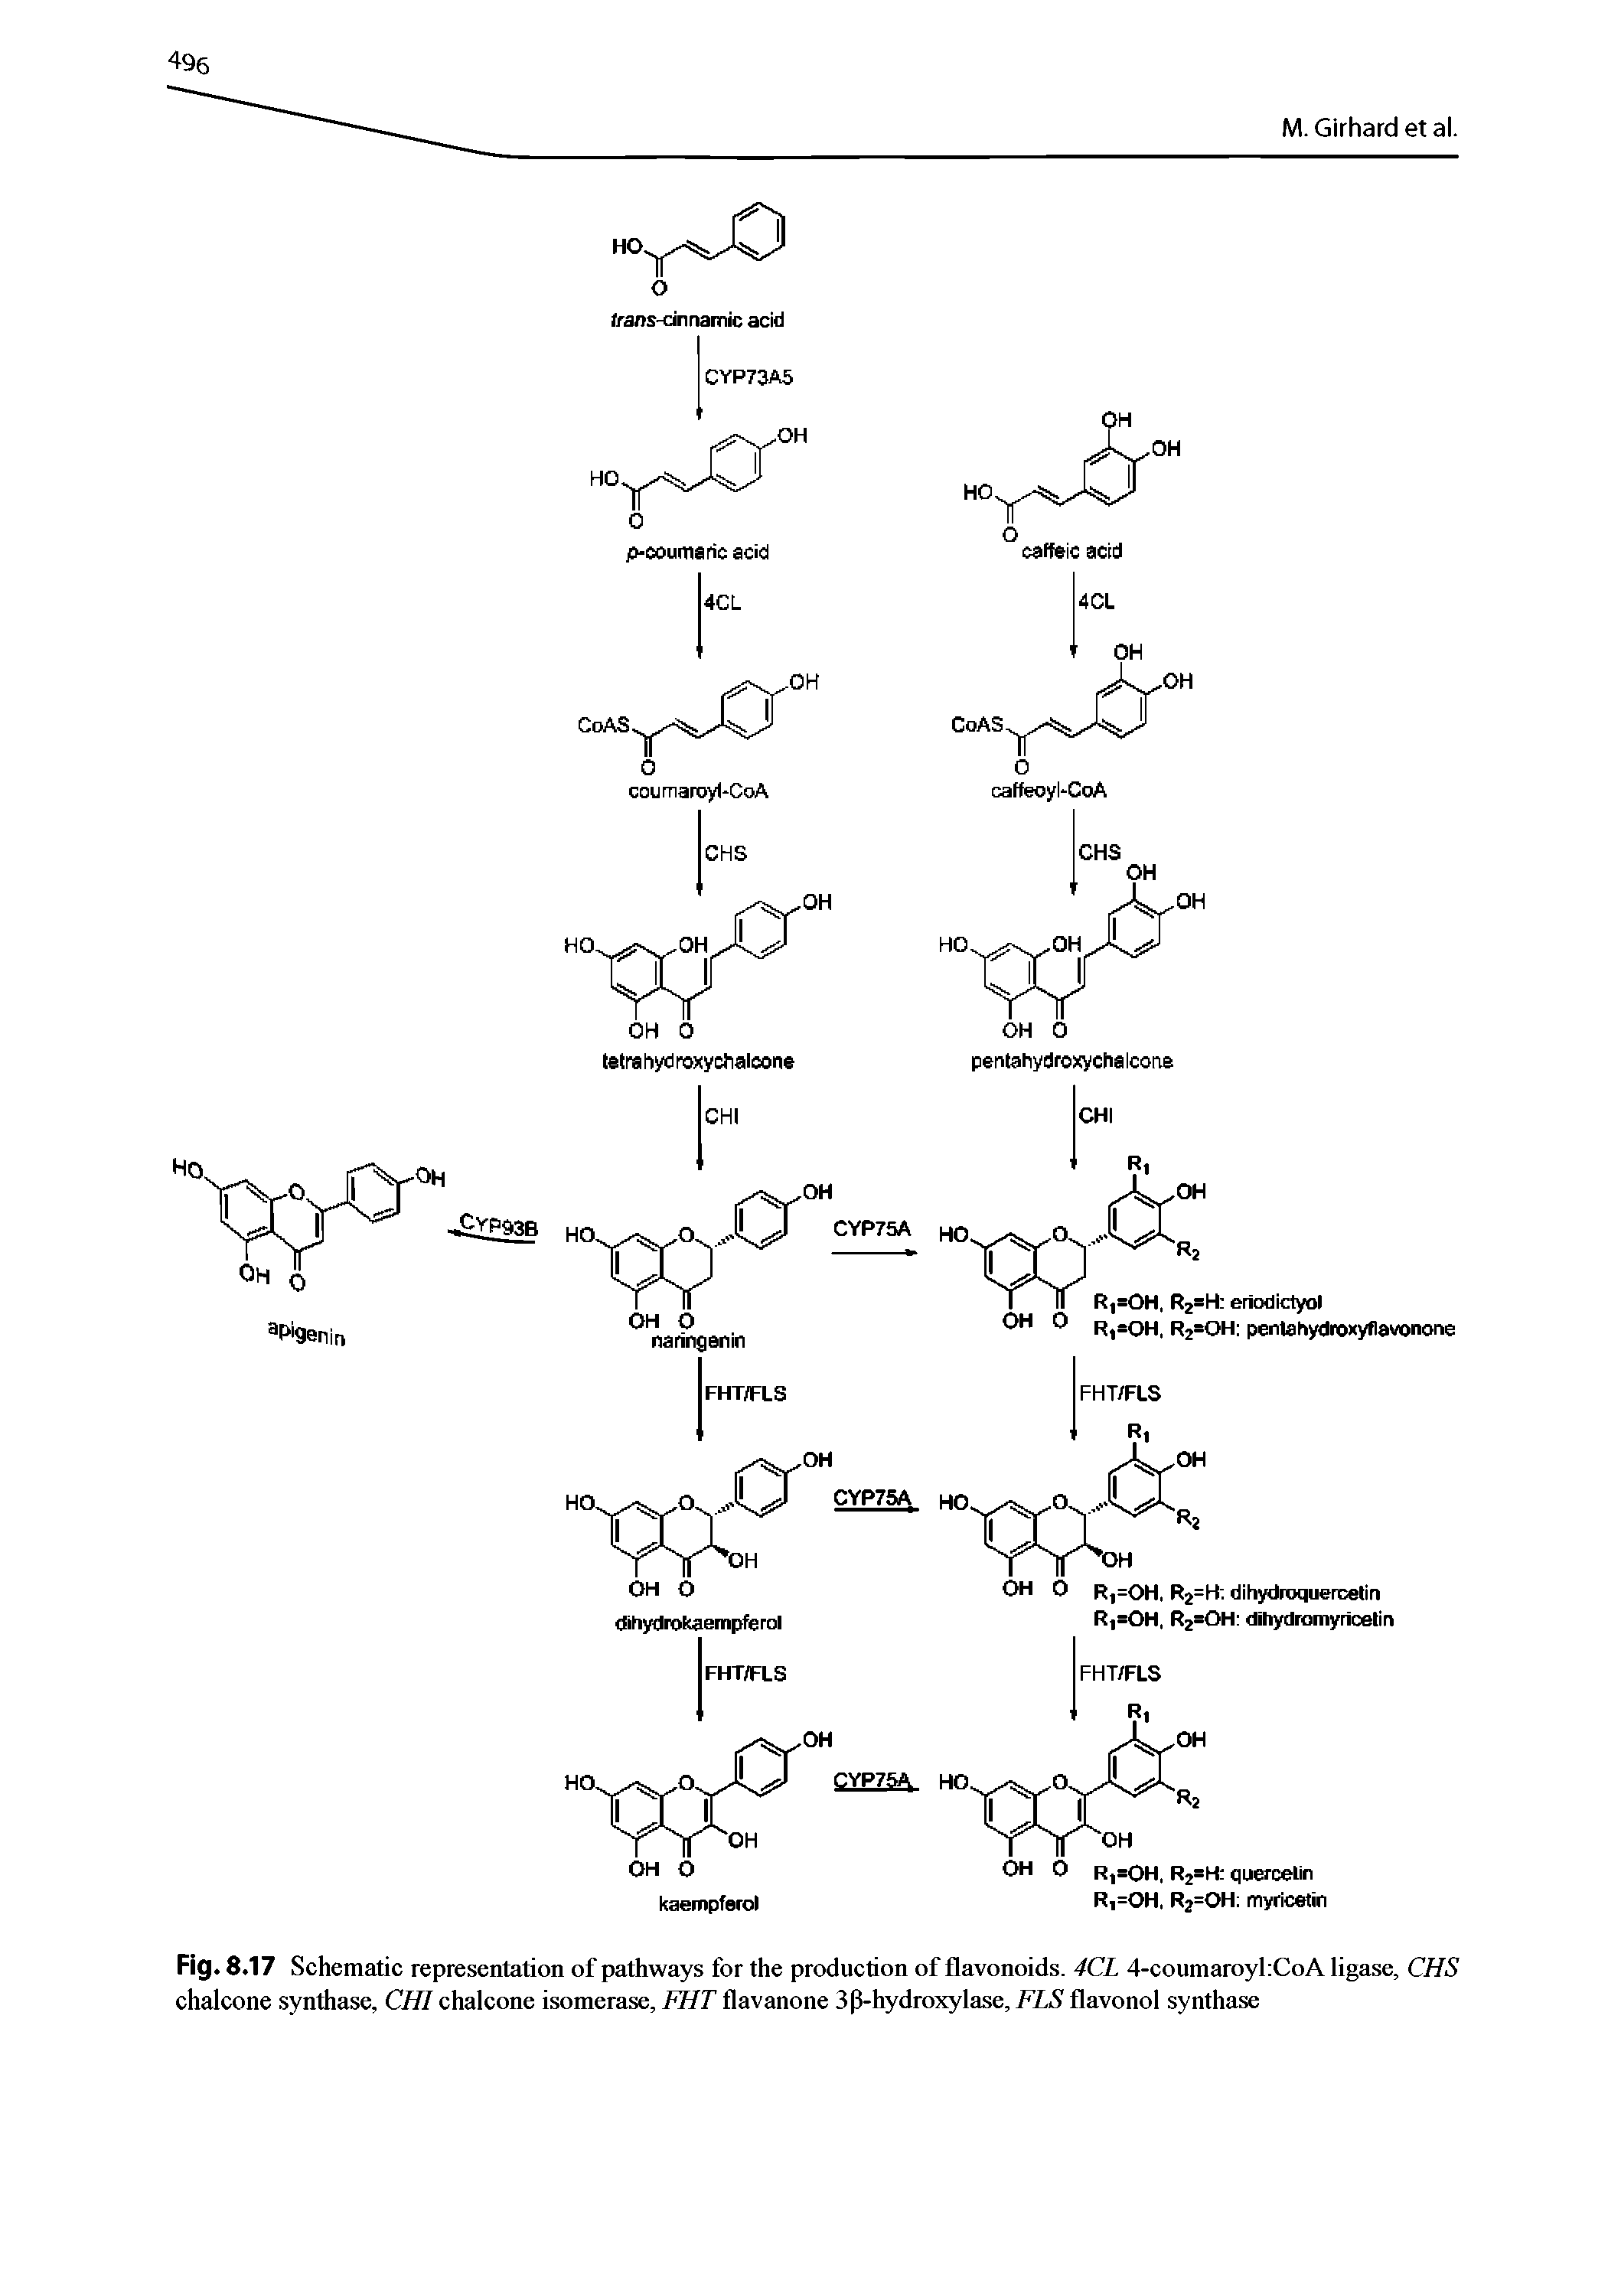 Fig. 8.17 Schematic representation of pathways for the production of flavonoids. 4CL 4-coumaroyl CoA ligase, CHS chalcone synthase, CHI chalcone isomerase, FHT flavanone 3p-hydroxylase, FLS flavonol synthase...